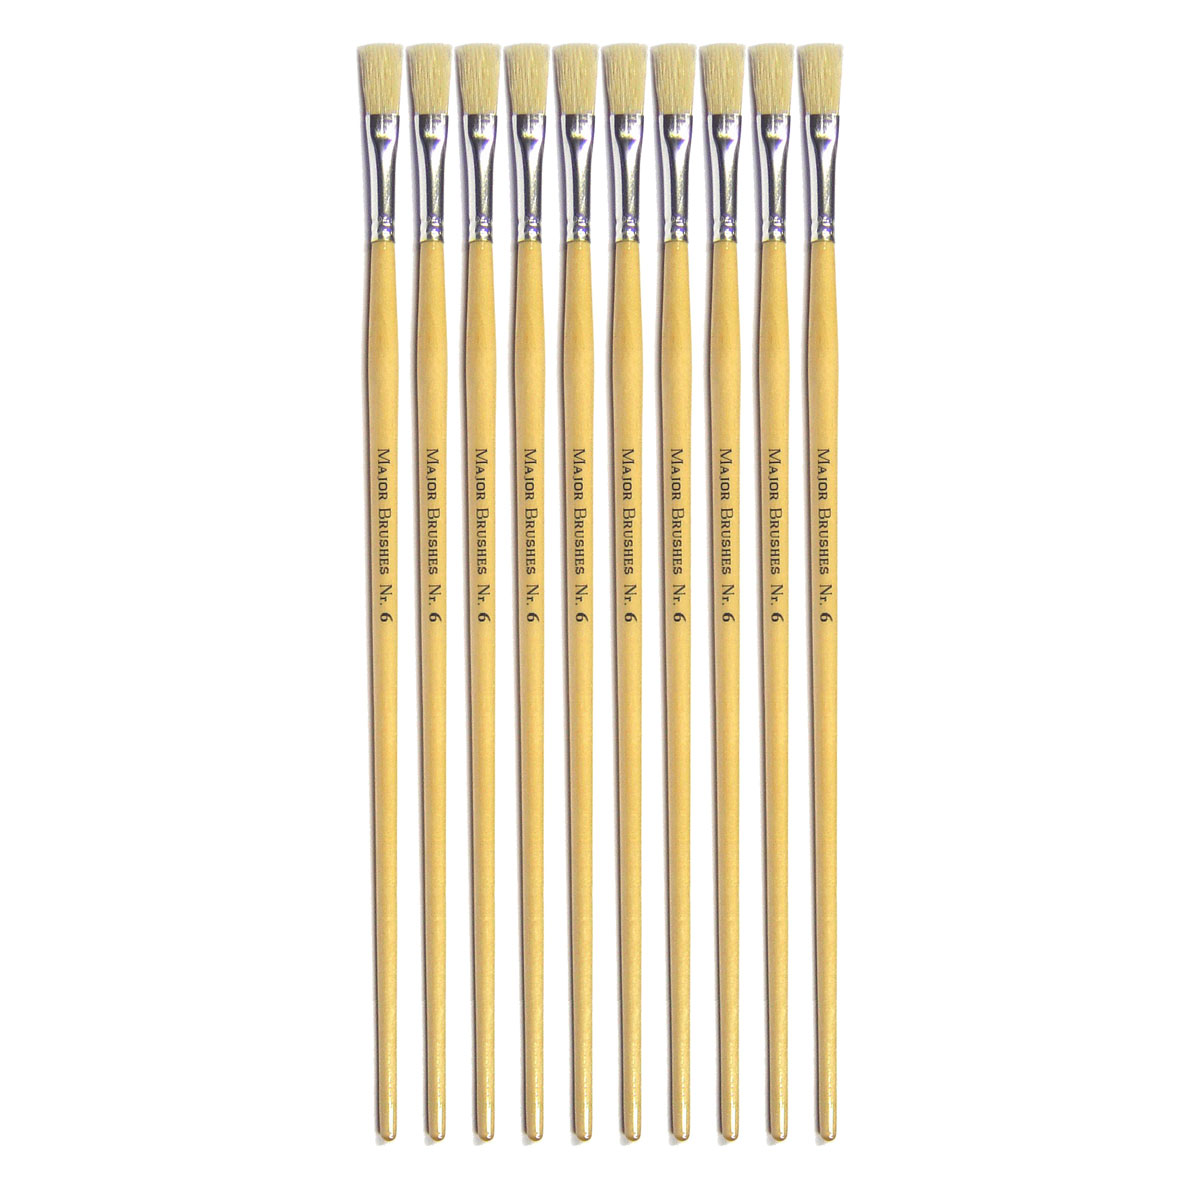 10 FOAM PAINT BRUSHES PAINTING BRUSHES DURABLE JUMBO PACK //SEE MY OTHER LISTINGS